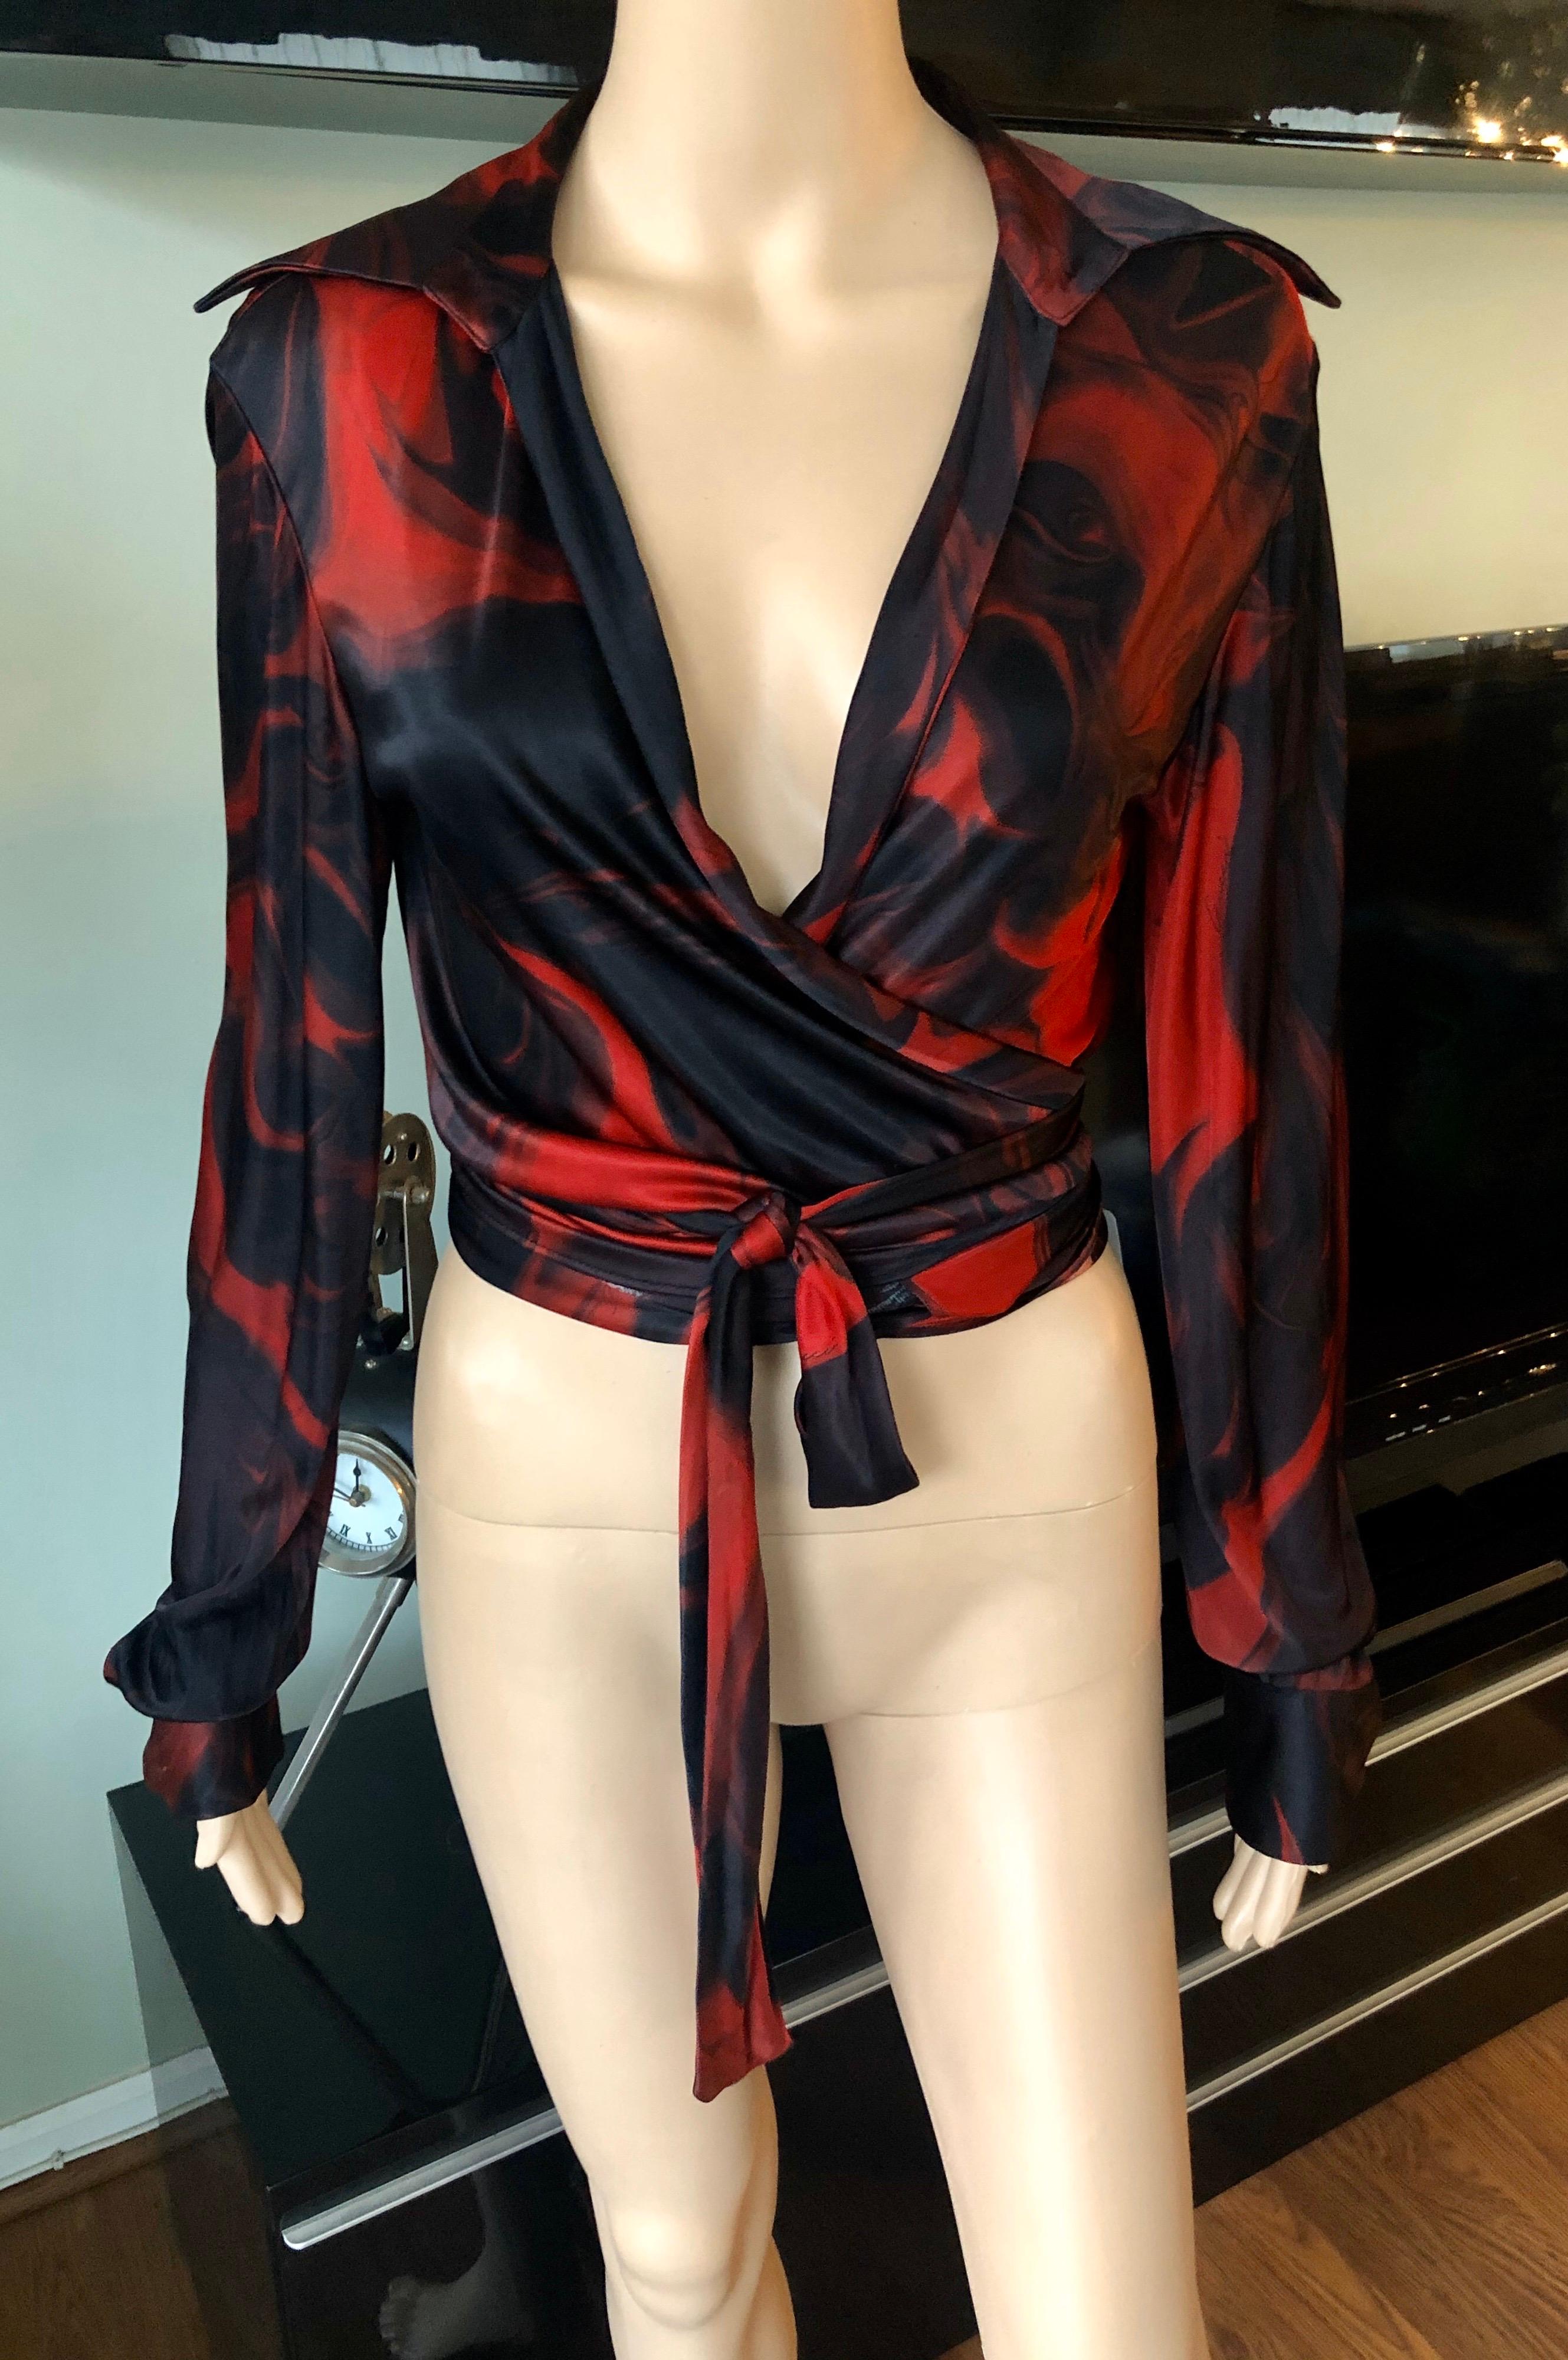 Tom Ford for Gucci S/S 2001 Plunging Neckline Wrap Crop Top Blouse IT 40

Gucci printed wrap crop top featuring plunging neckline, sash-tie closure at front and long sleeves.